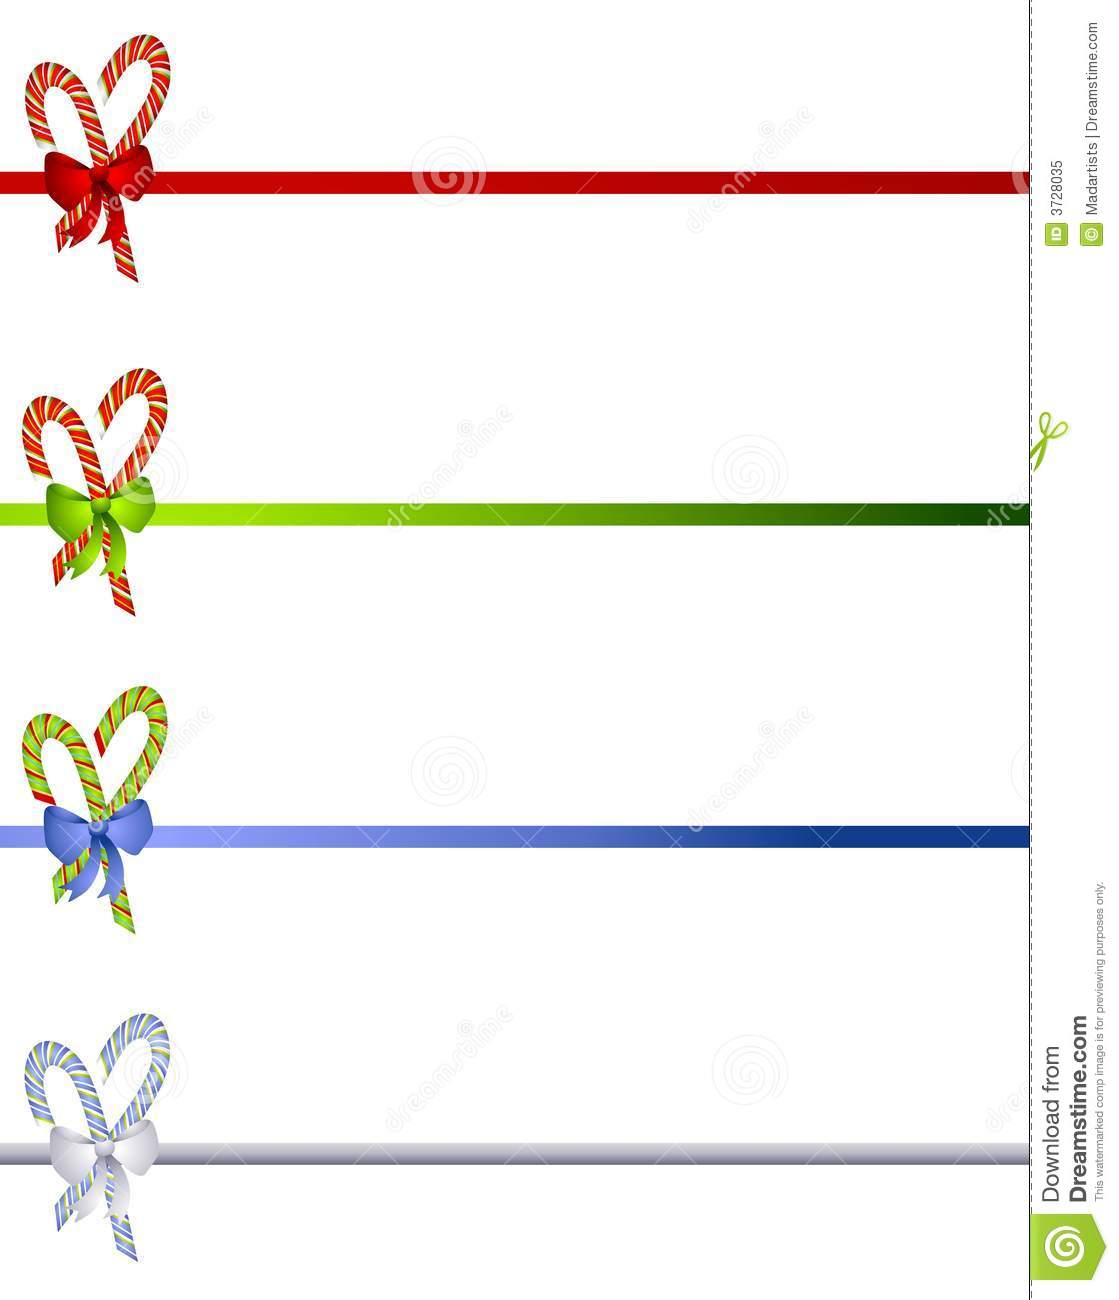 Candy Cane And Bows Borders Stock Illustration.